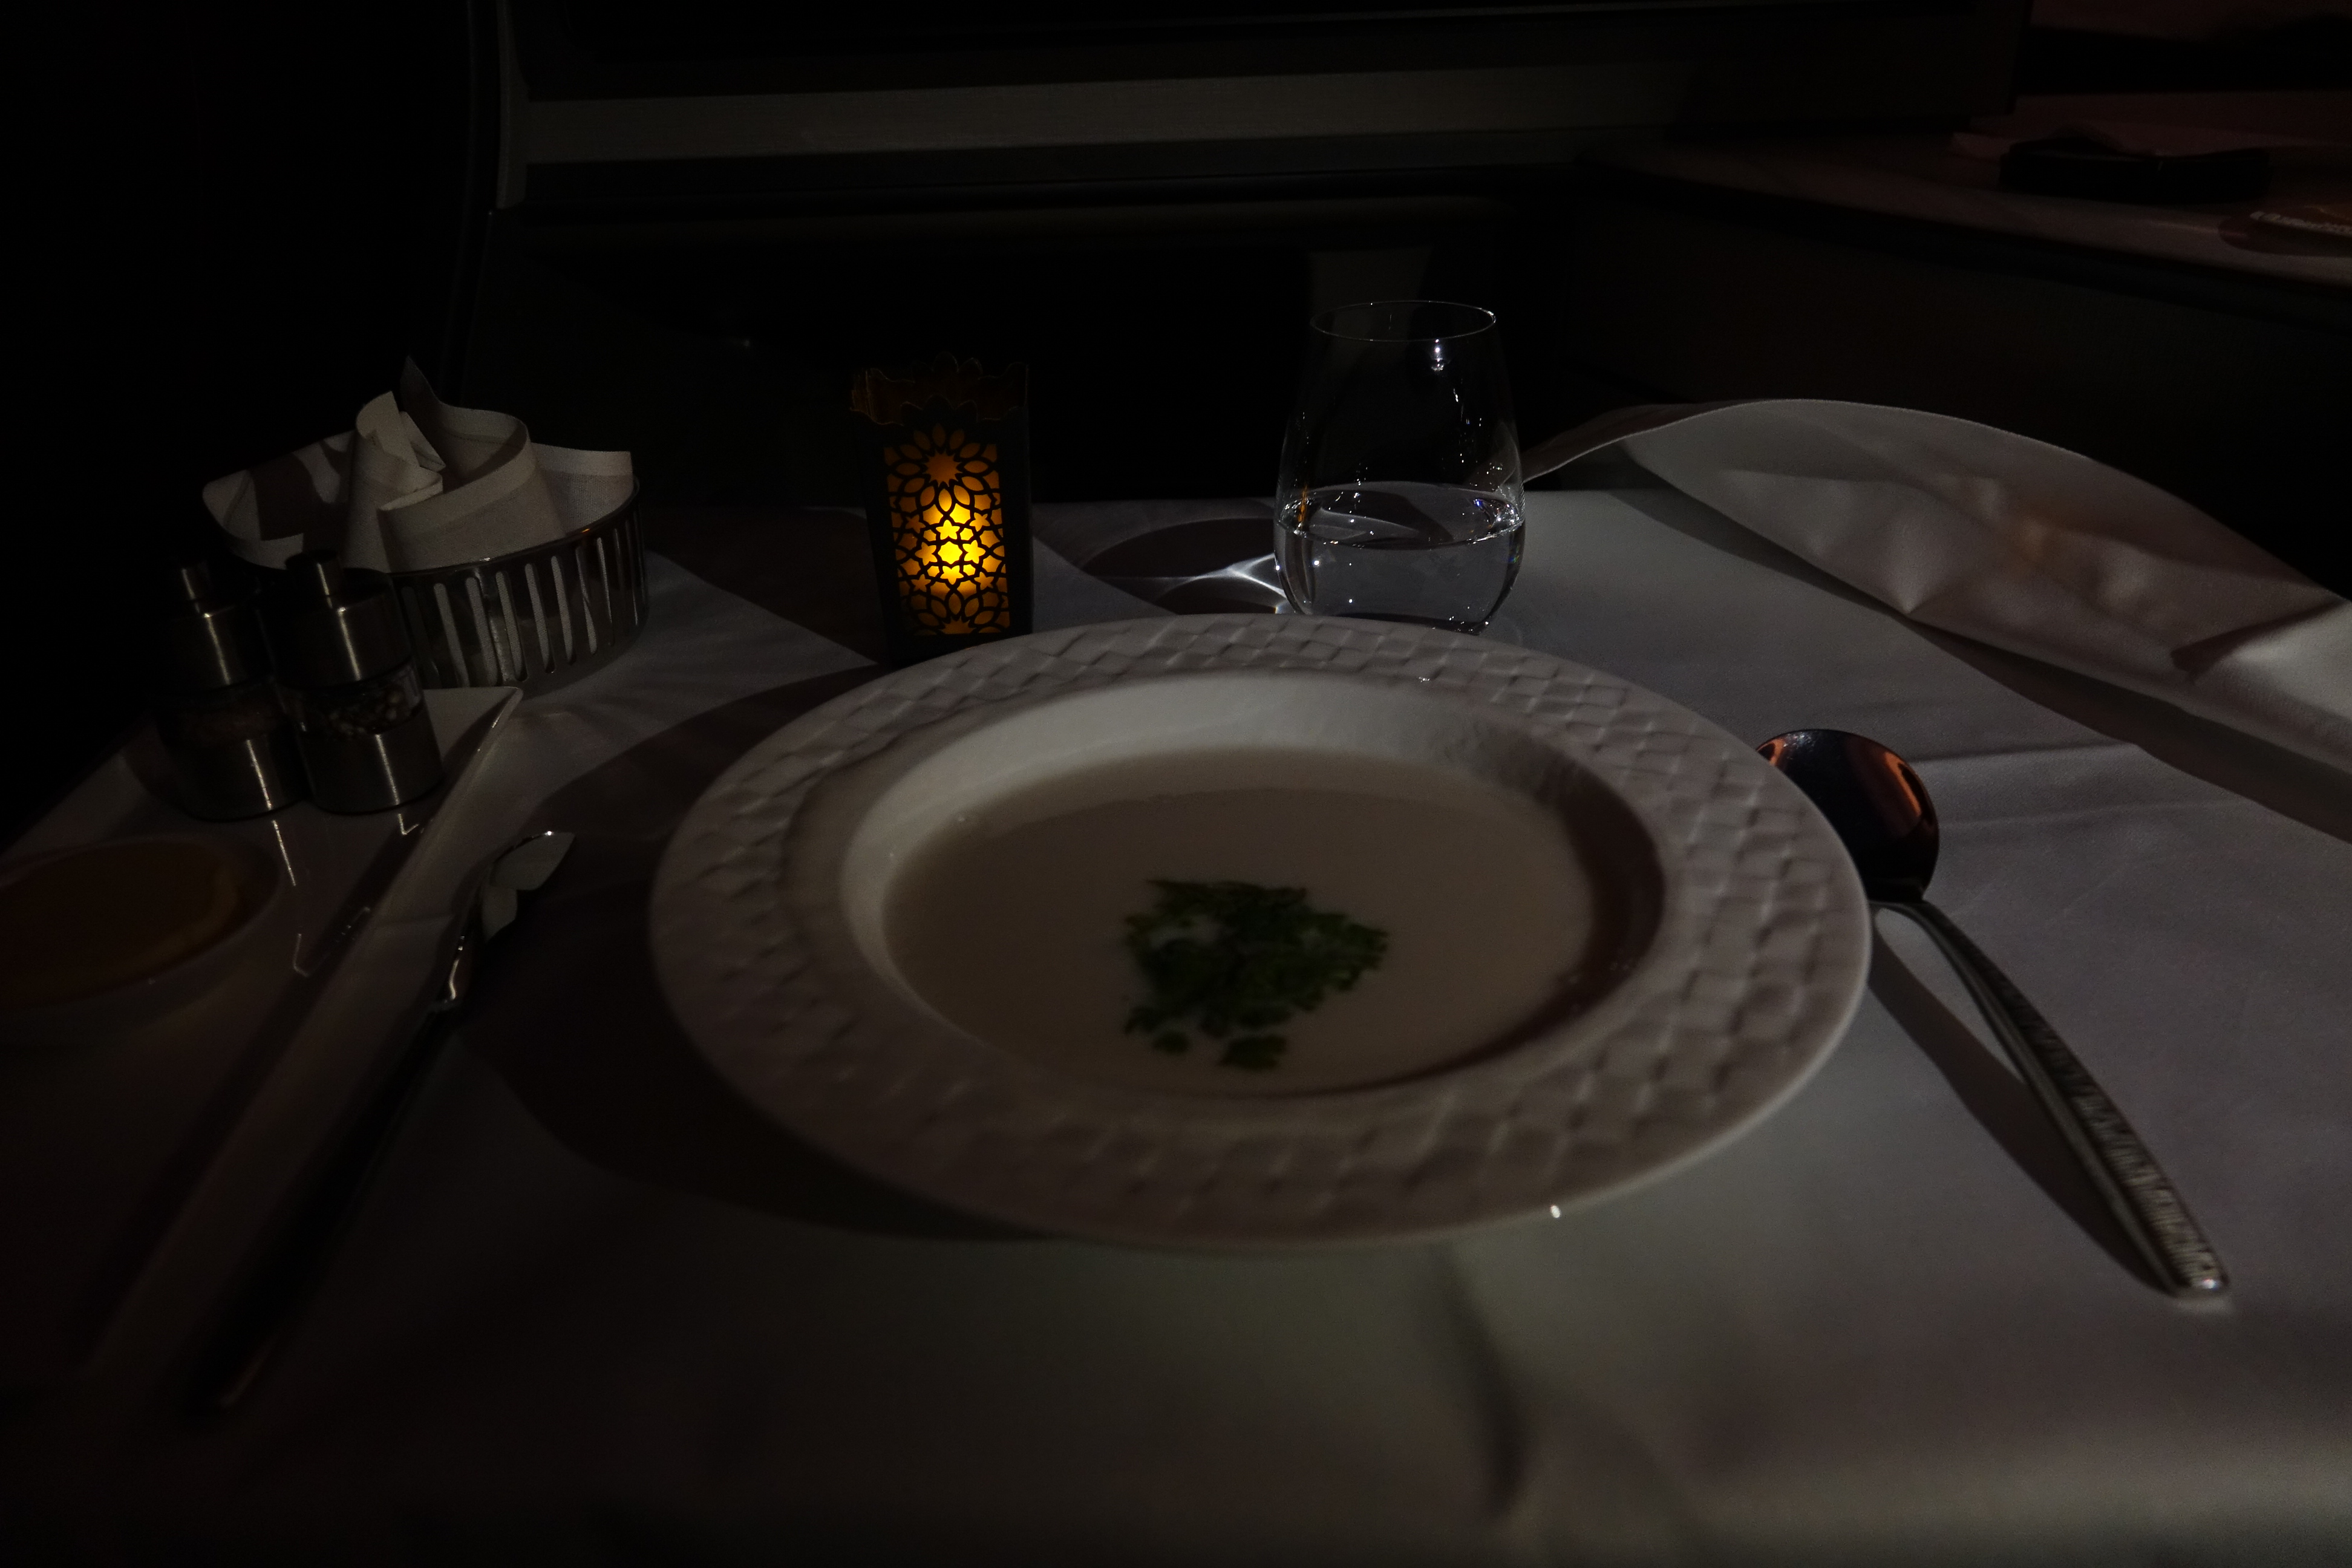 a plate of soup on a table